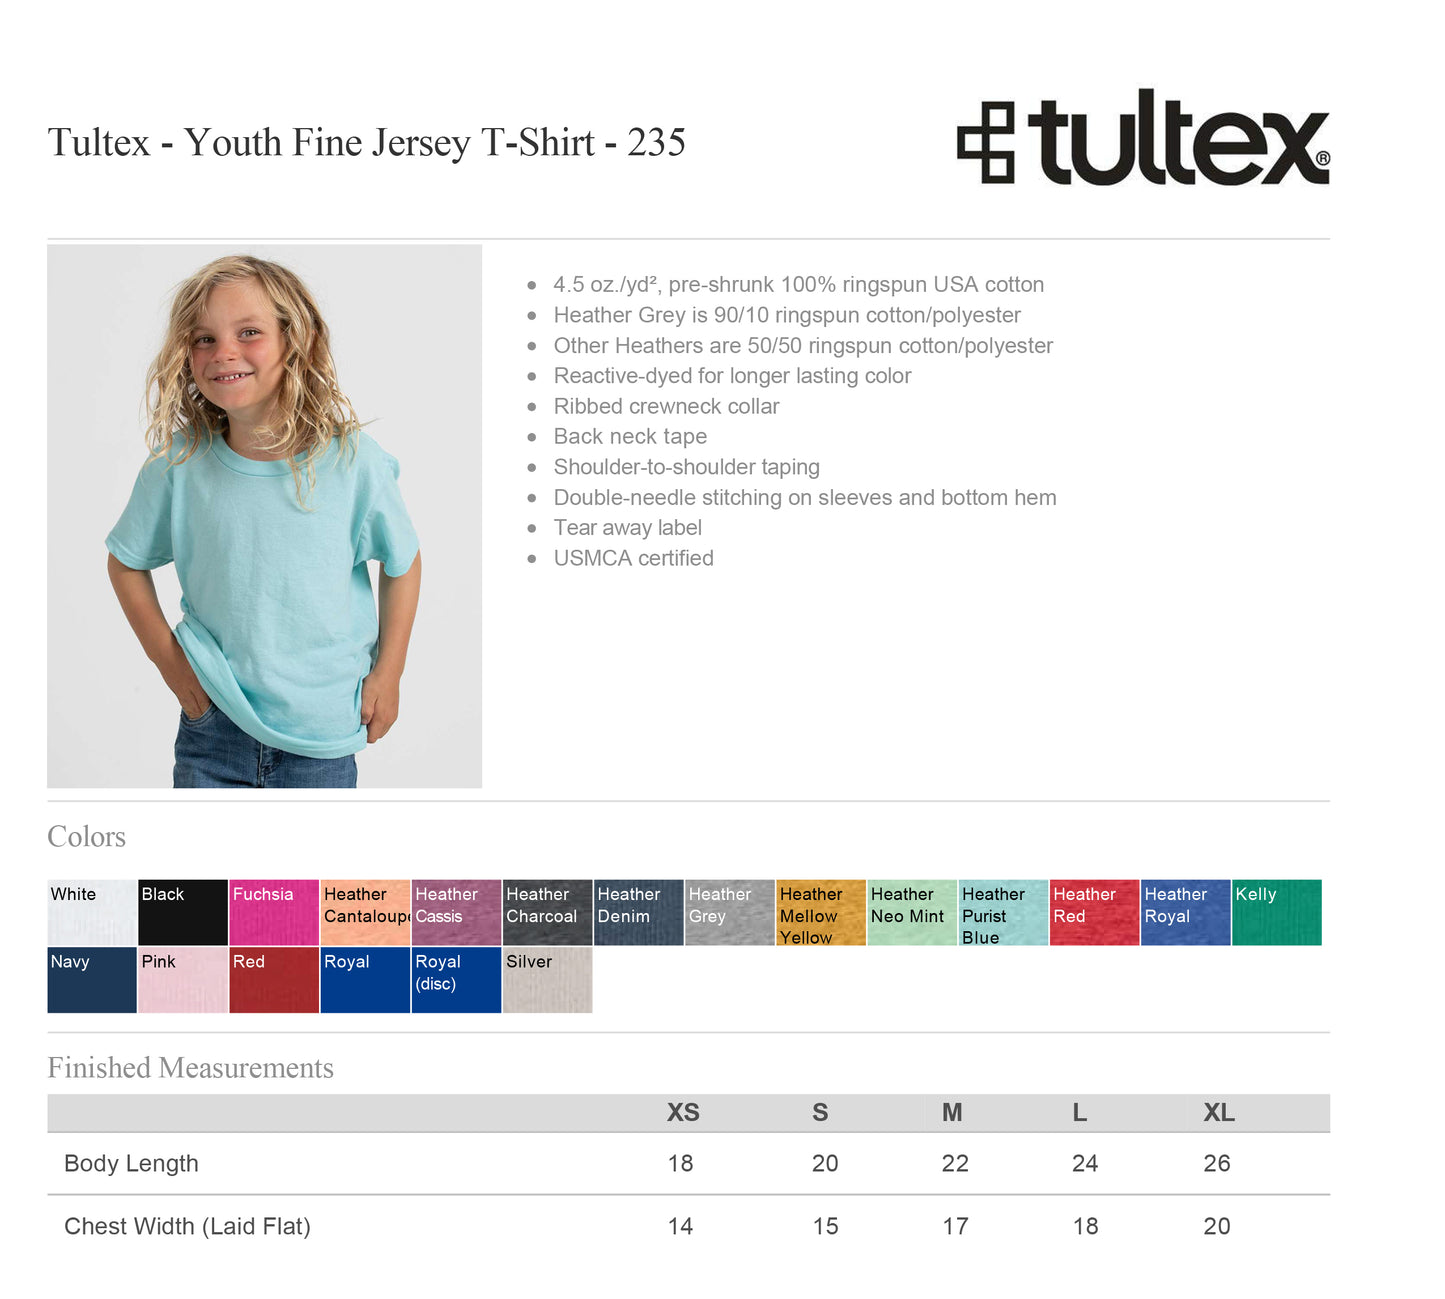 Tultex 235 - Youth Fine Jersey T-Shirt